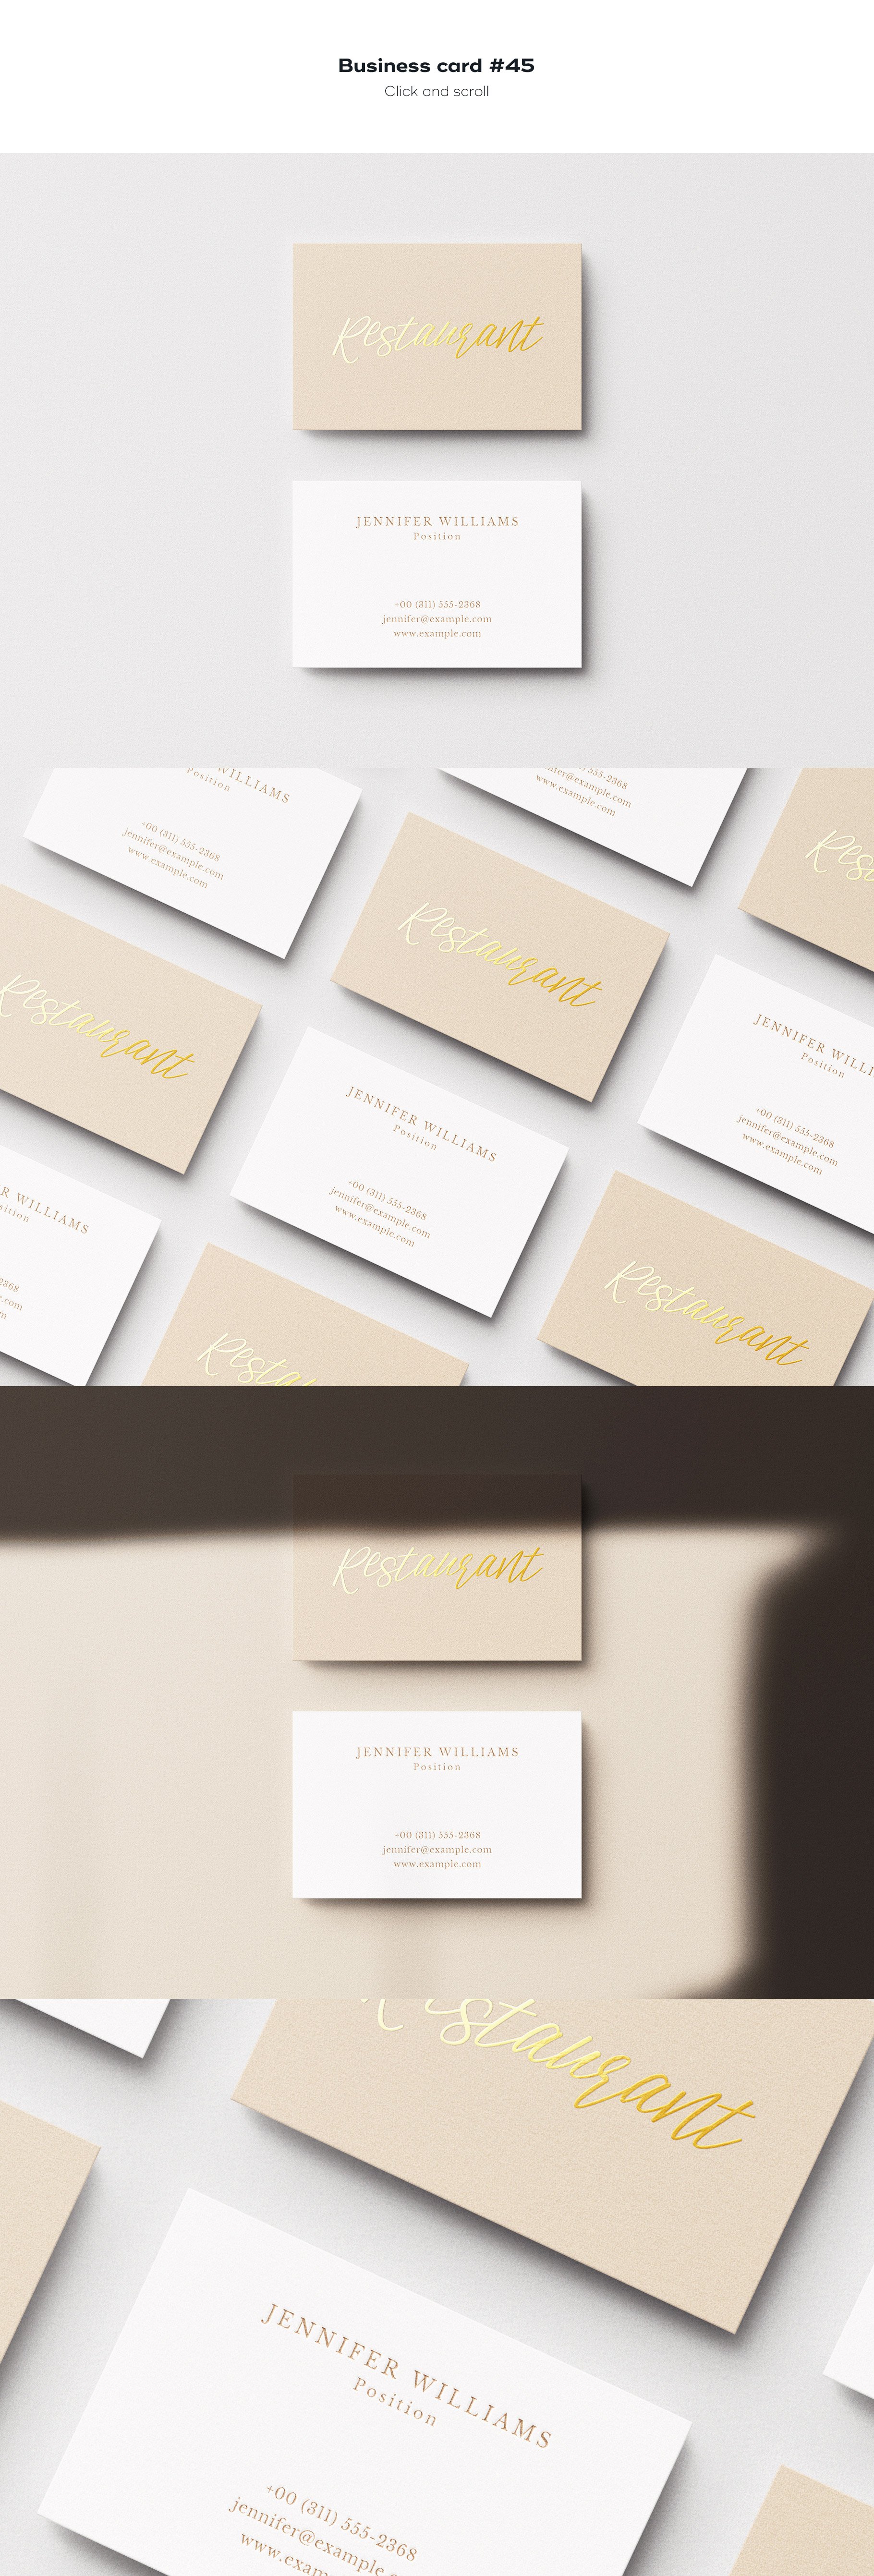 business card 45 840